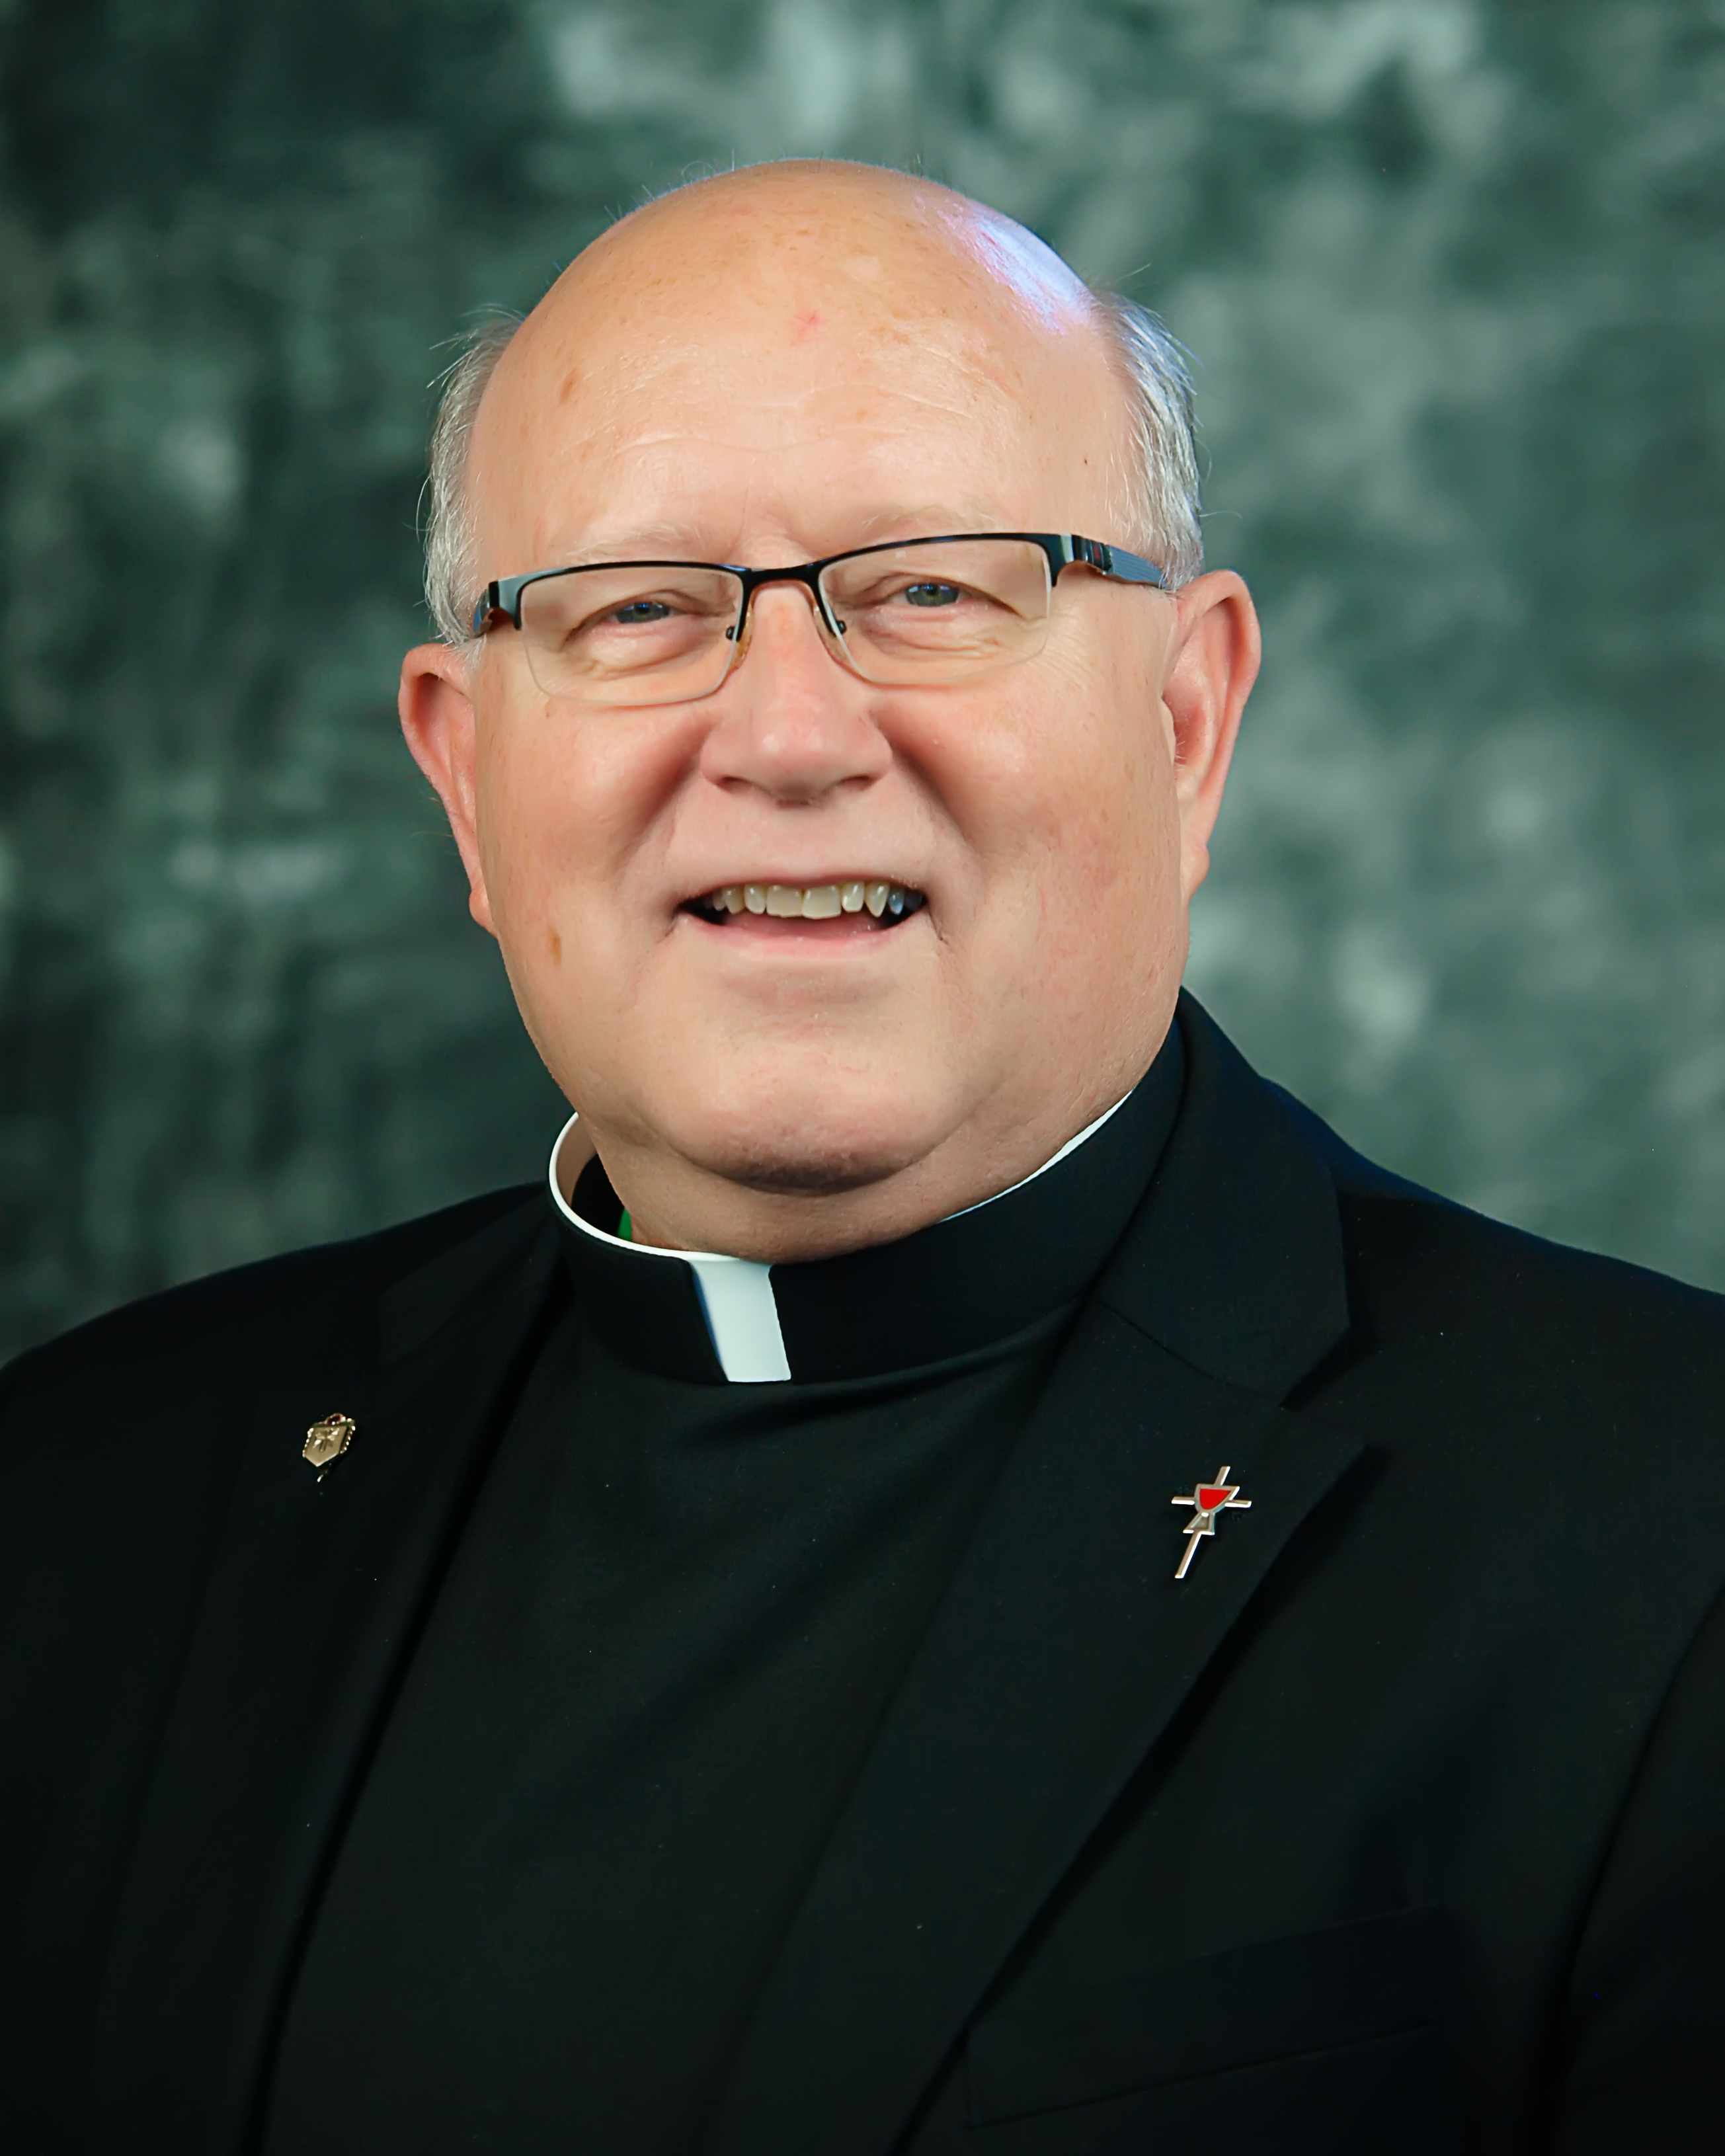 Fr. Friebel to Mark 40th Anniversary